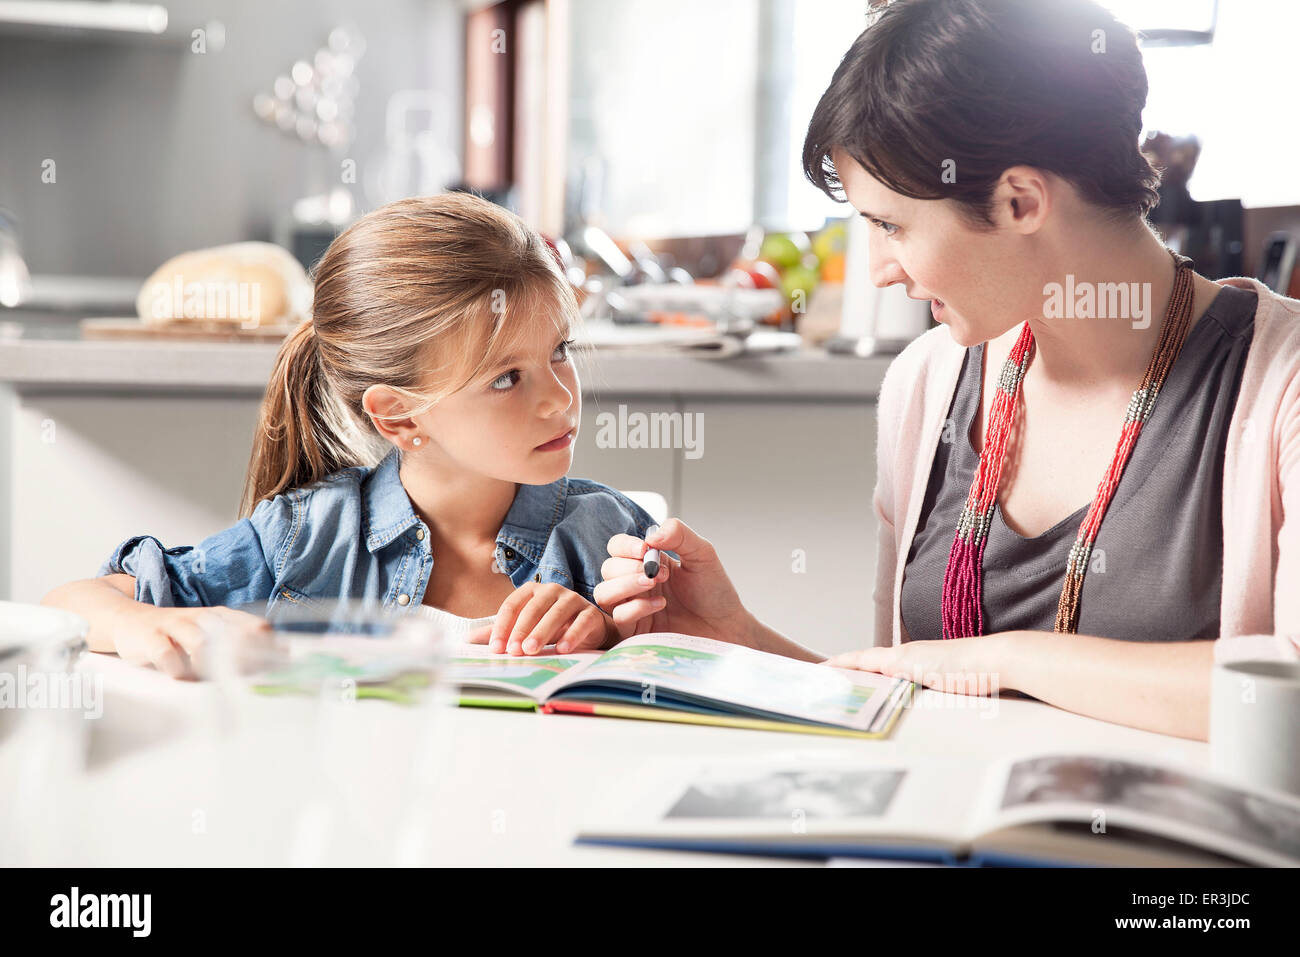 Mother and young daughter reading together Stock Photo